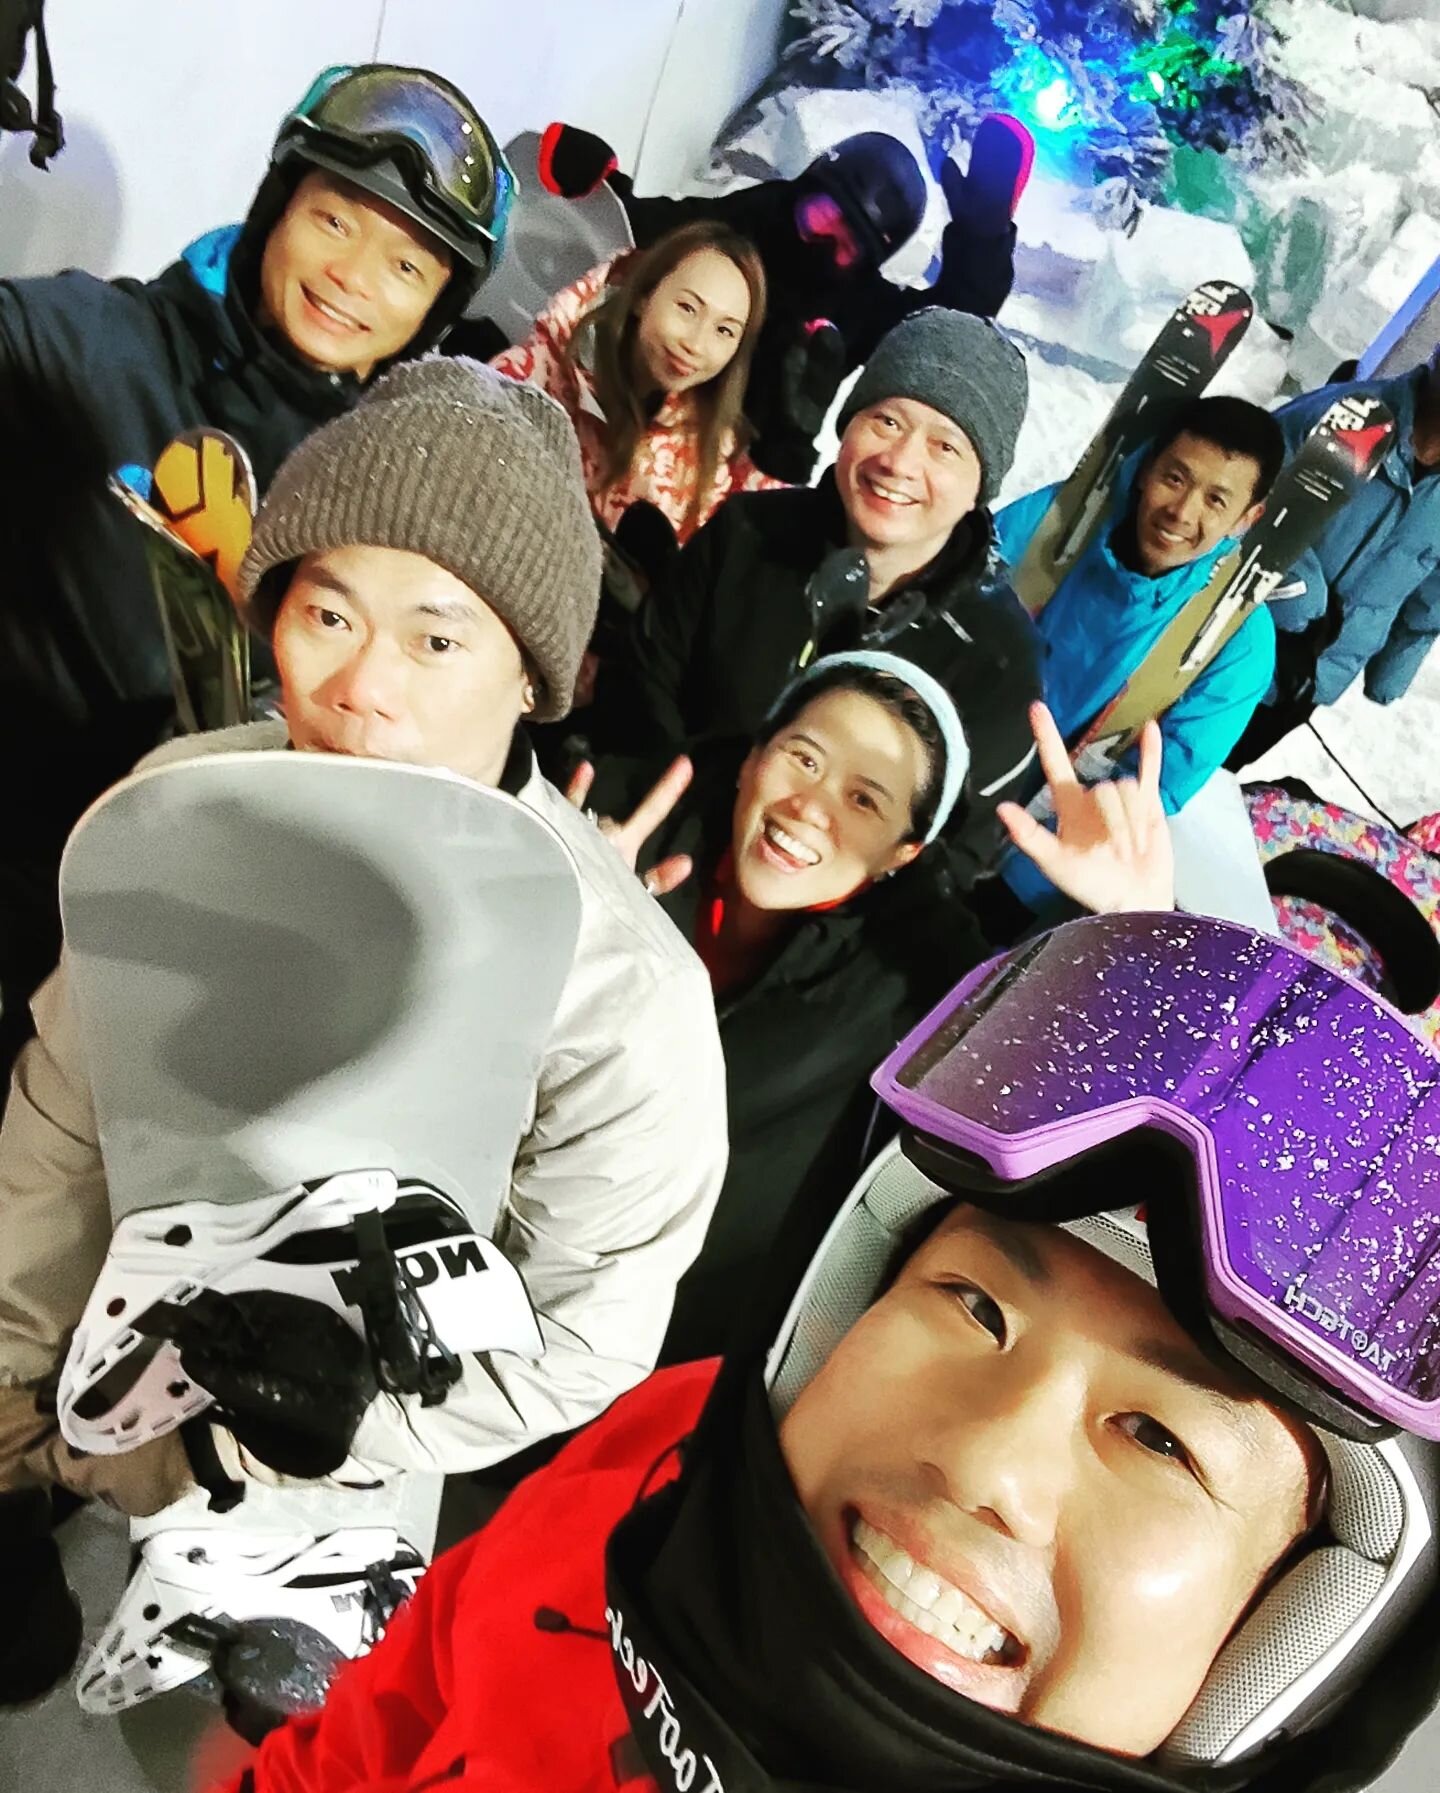 Skiers and Snowboarders gathered together to try out the slope at Ice Magic! We had a blast testing our skills on the man-made snow.

#icemagic #snowinsingapore #skiandsnowboard